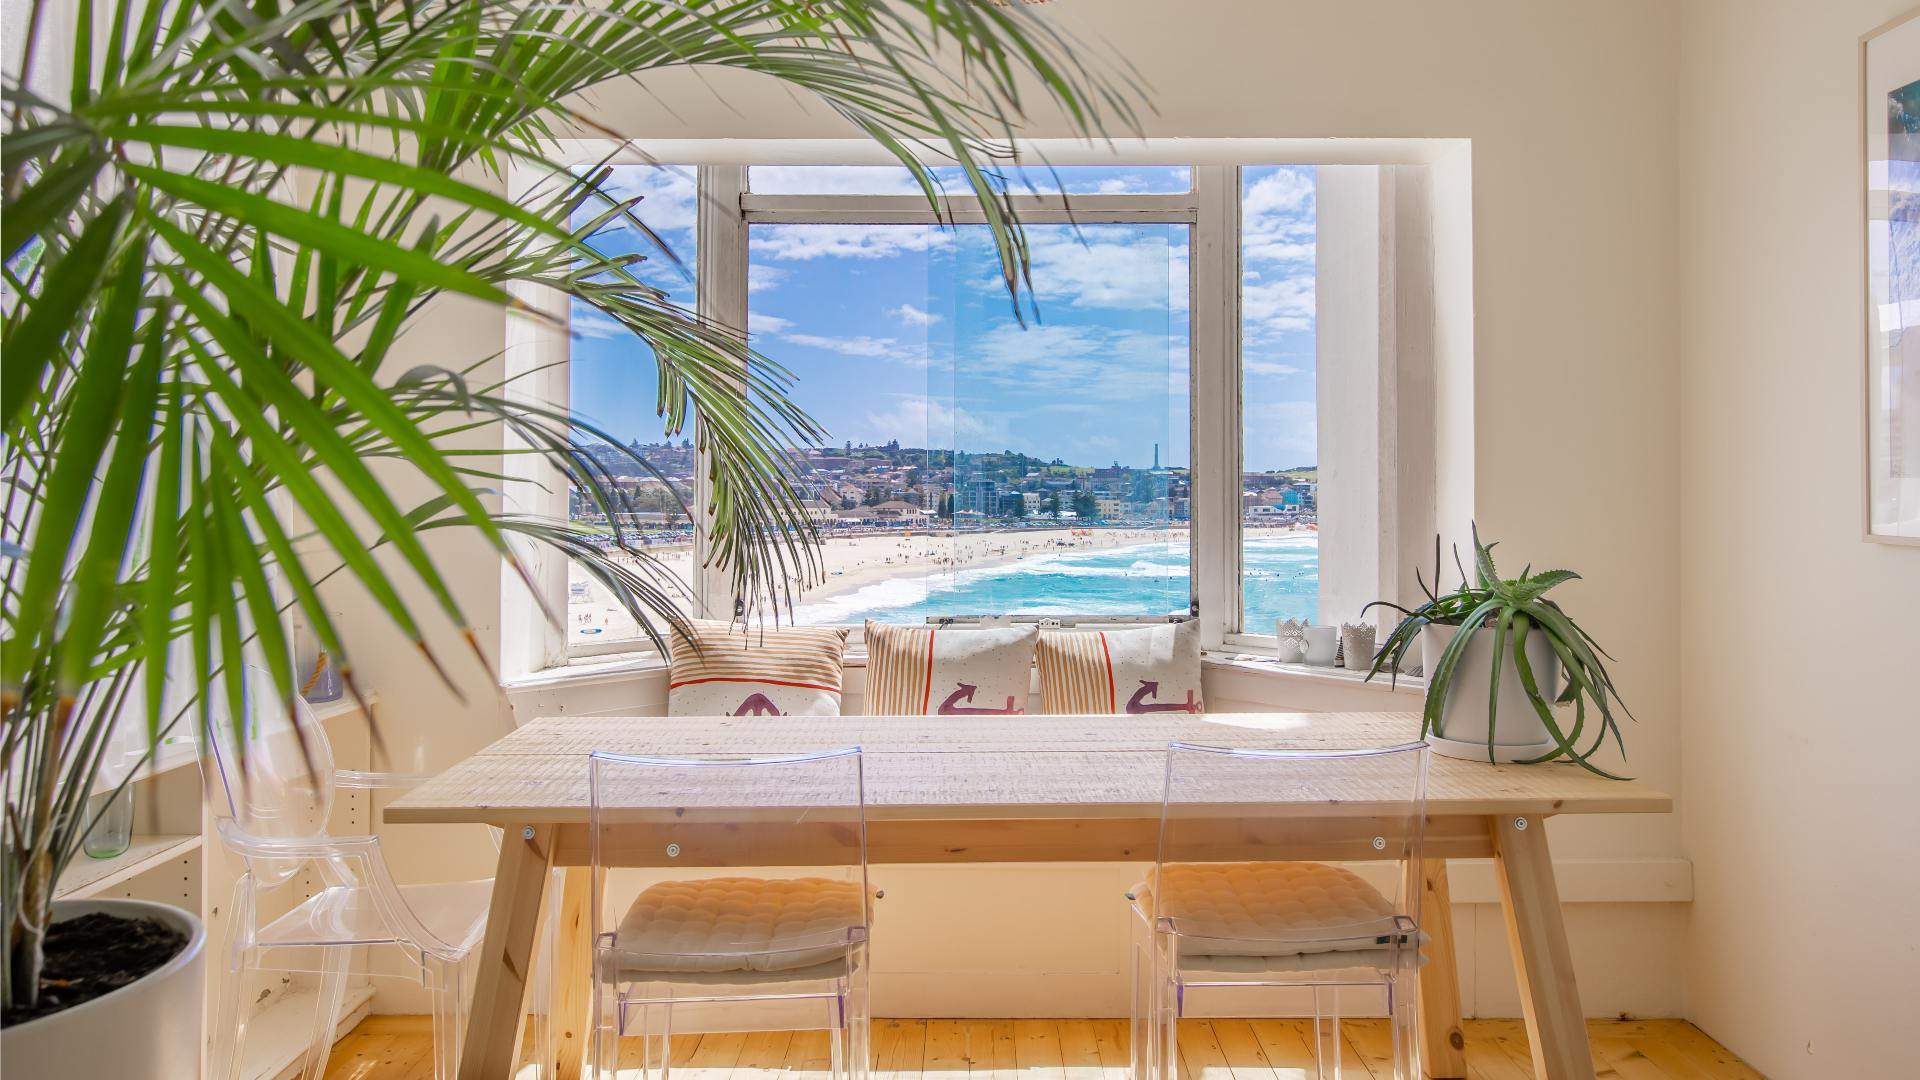 All of the Best Inner-City Airbnbs Around Australia with Breathtaking Views